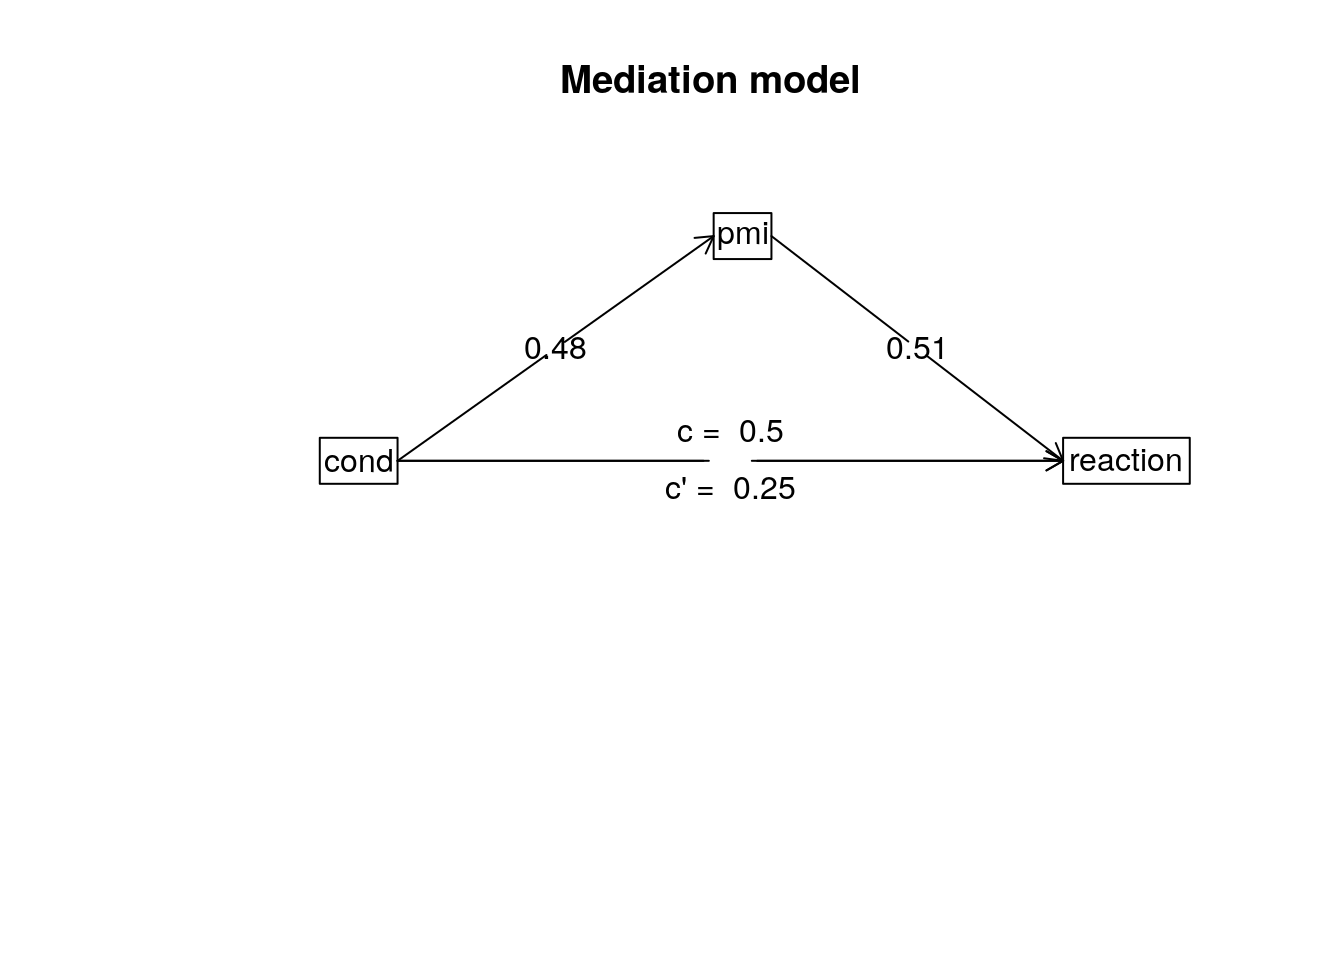 This figure shows a simple mediation diagram